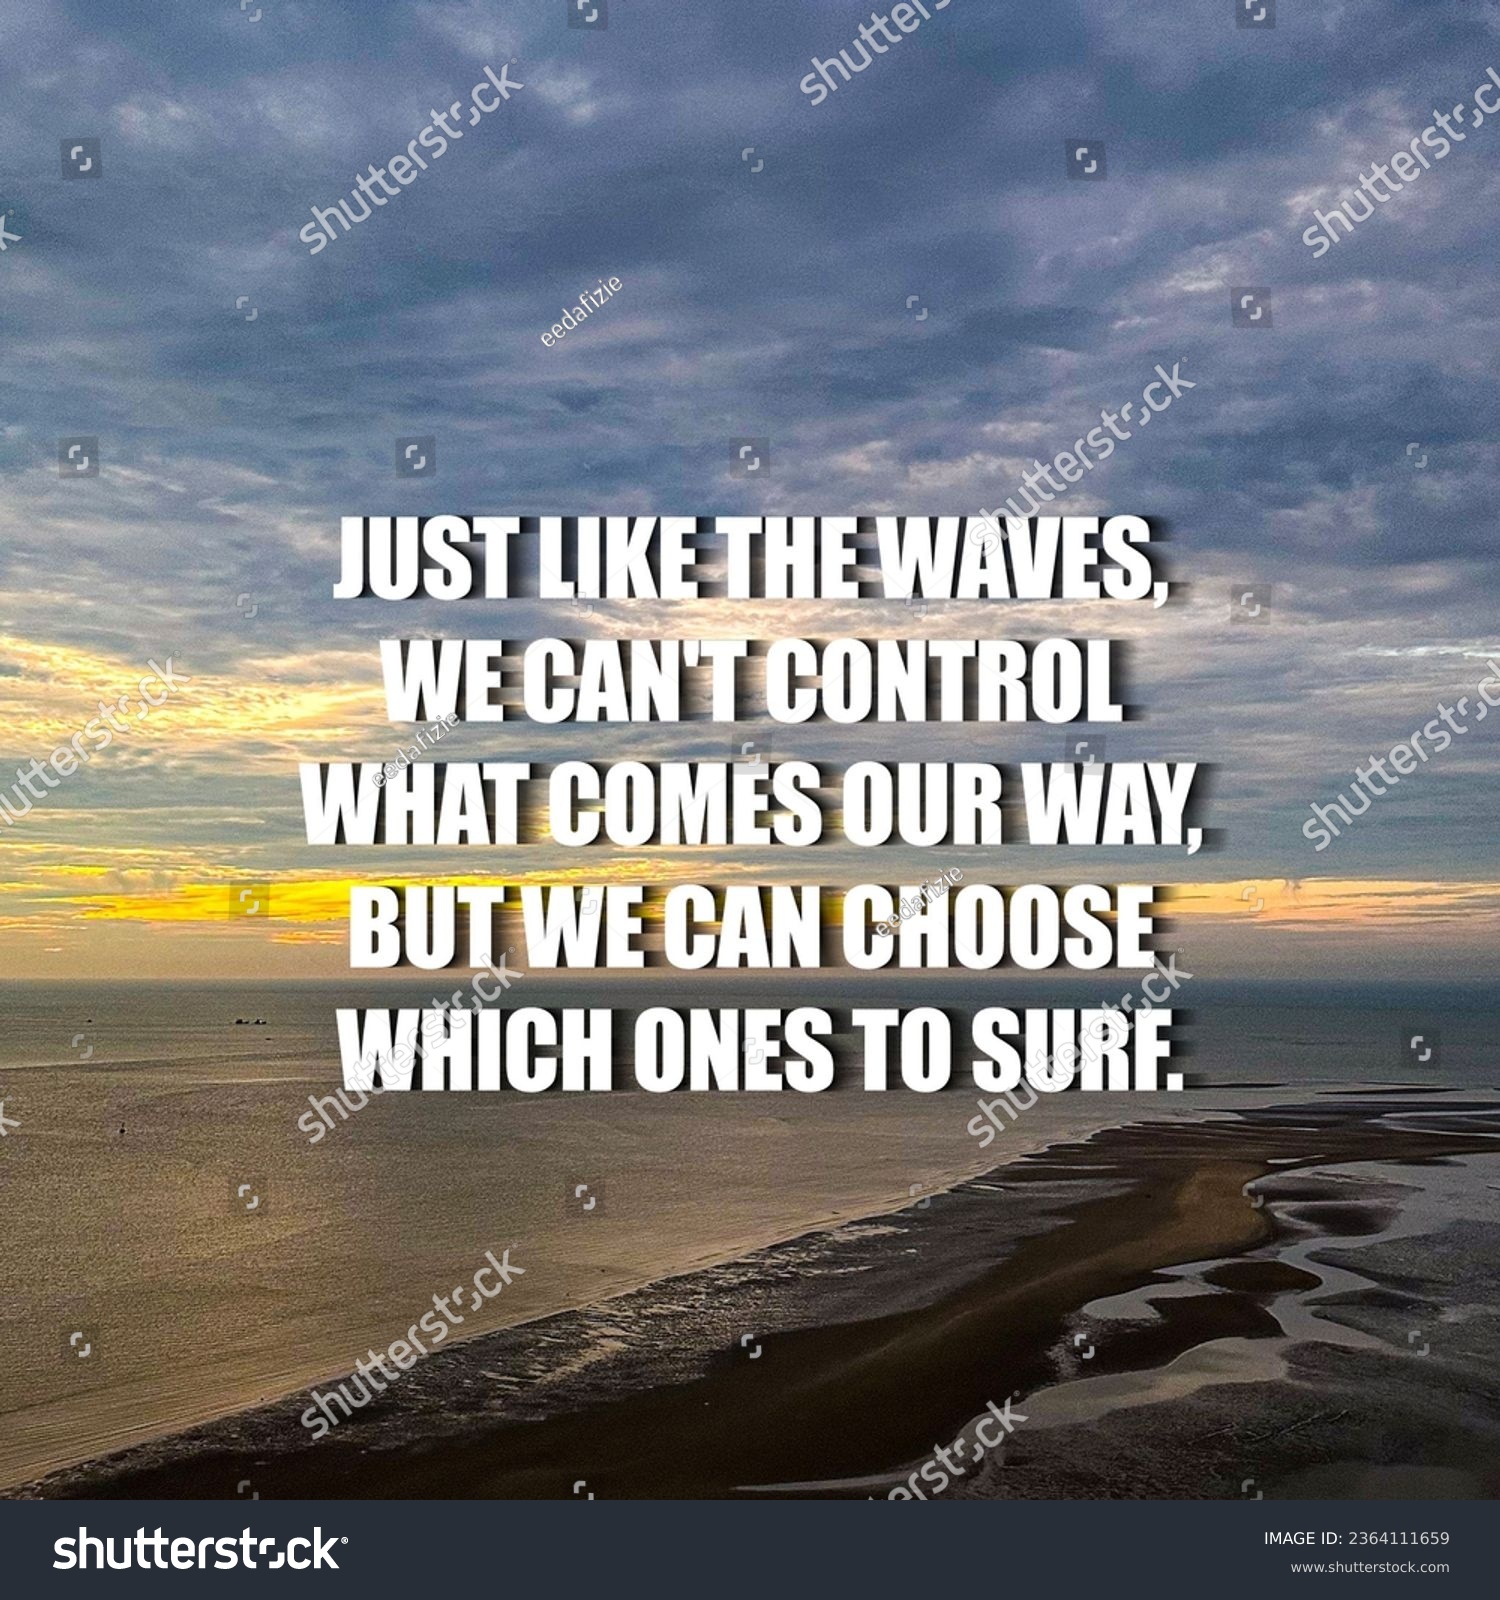 Inspirational and motivational quotes. Just like the waves, we can't control what comes our way, but we can choose which ones to surf. #2364111659